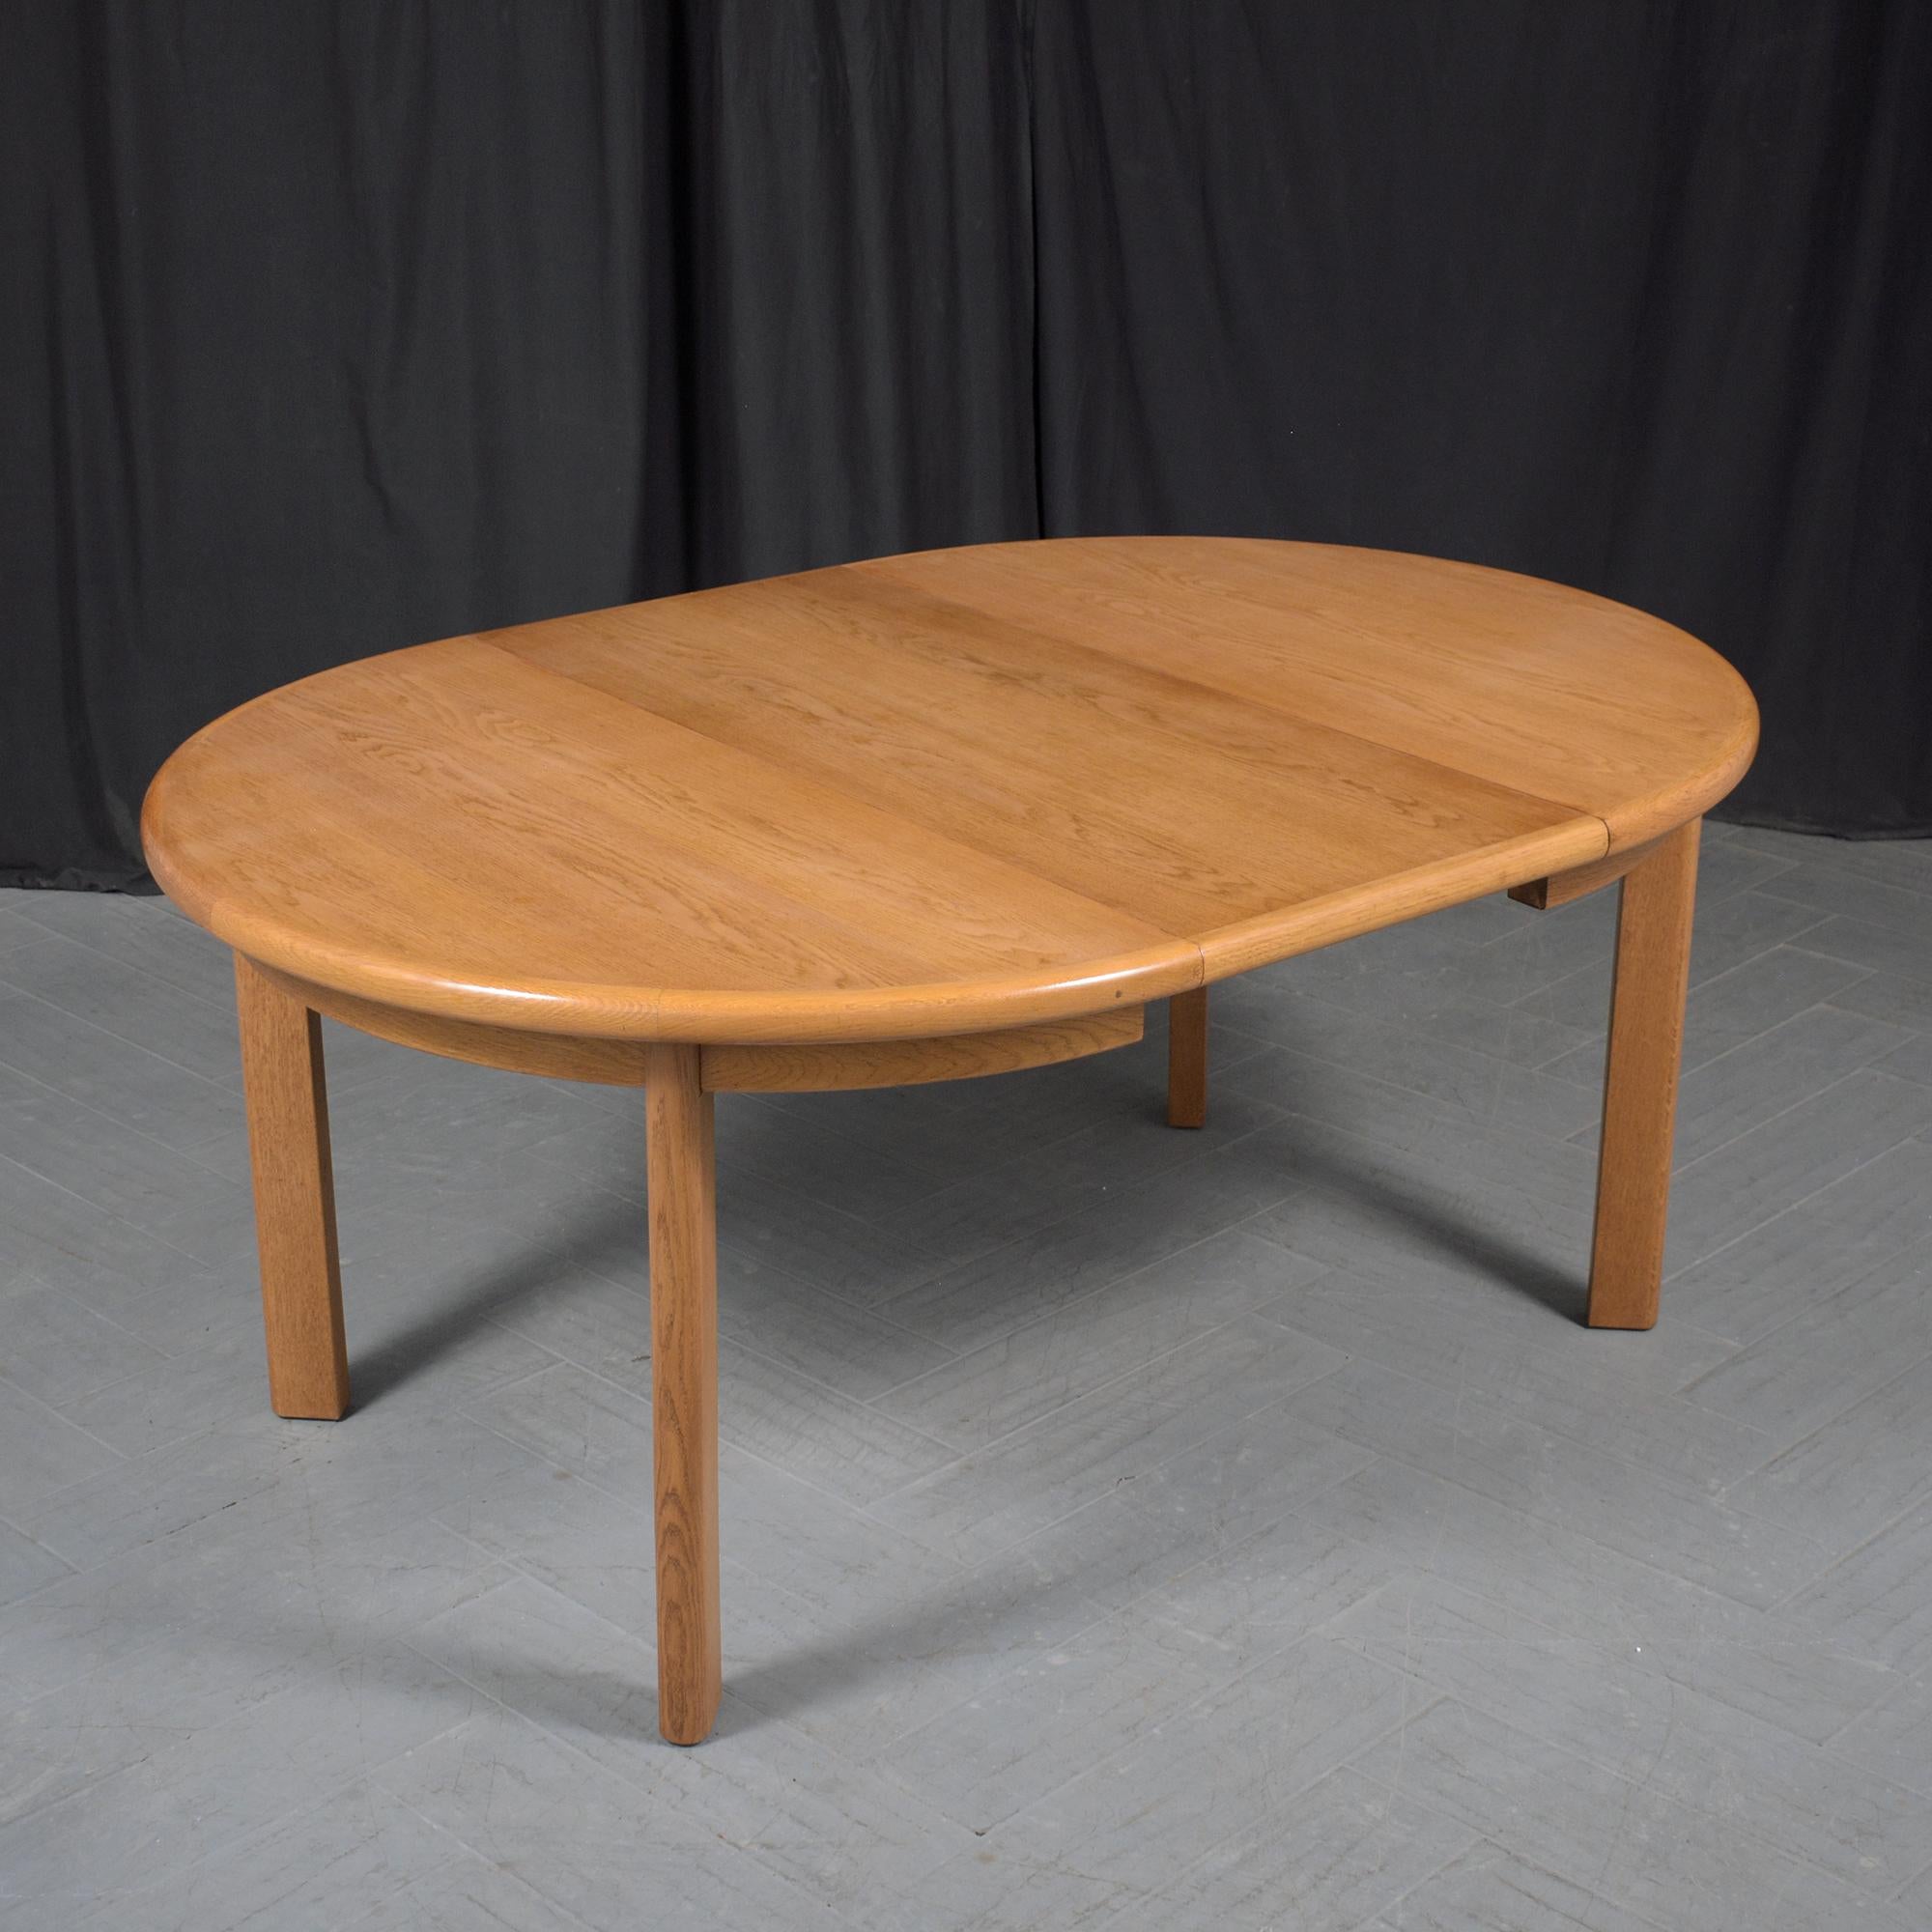 1970s Danish Modern Teak Dining Table with Extendable Leaves In Good Condition For Sale In Los Angeles, CA